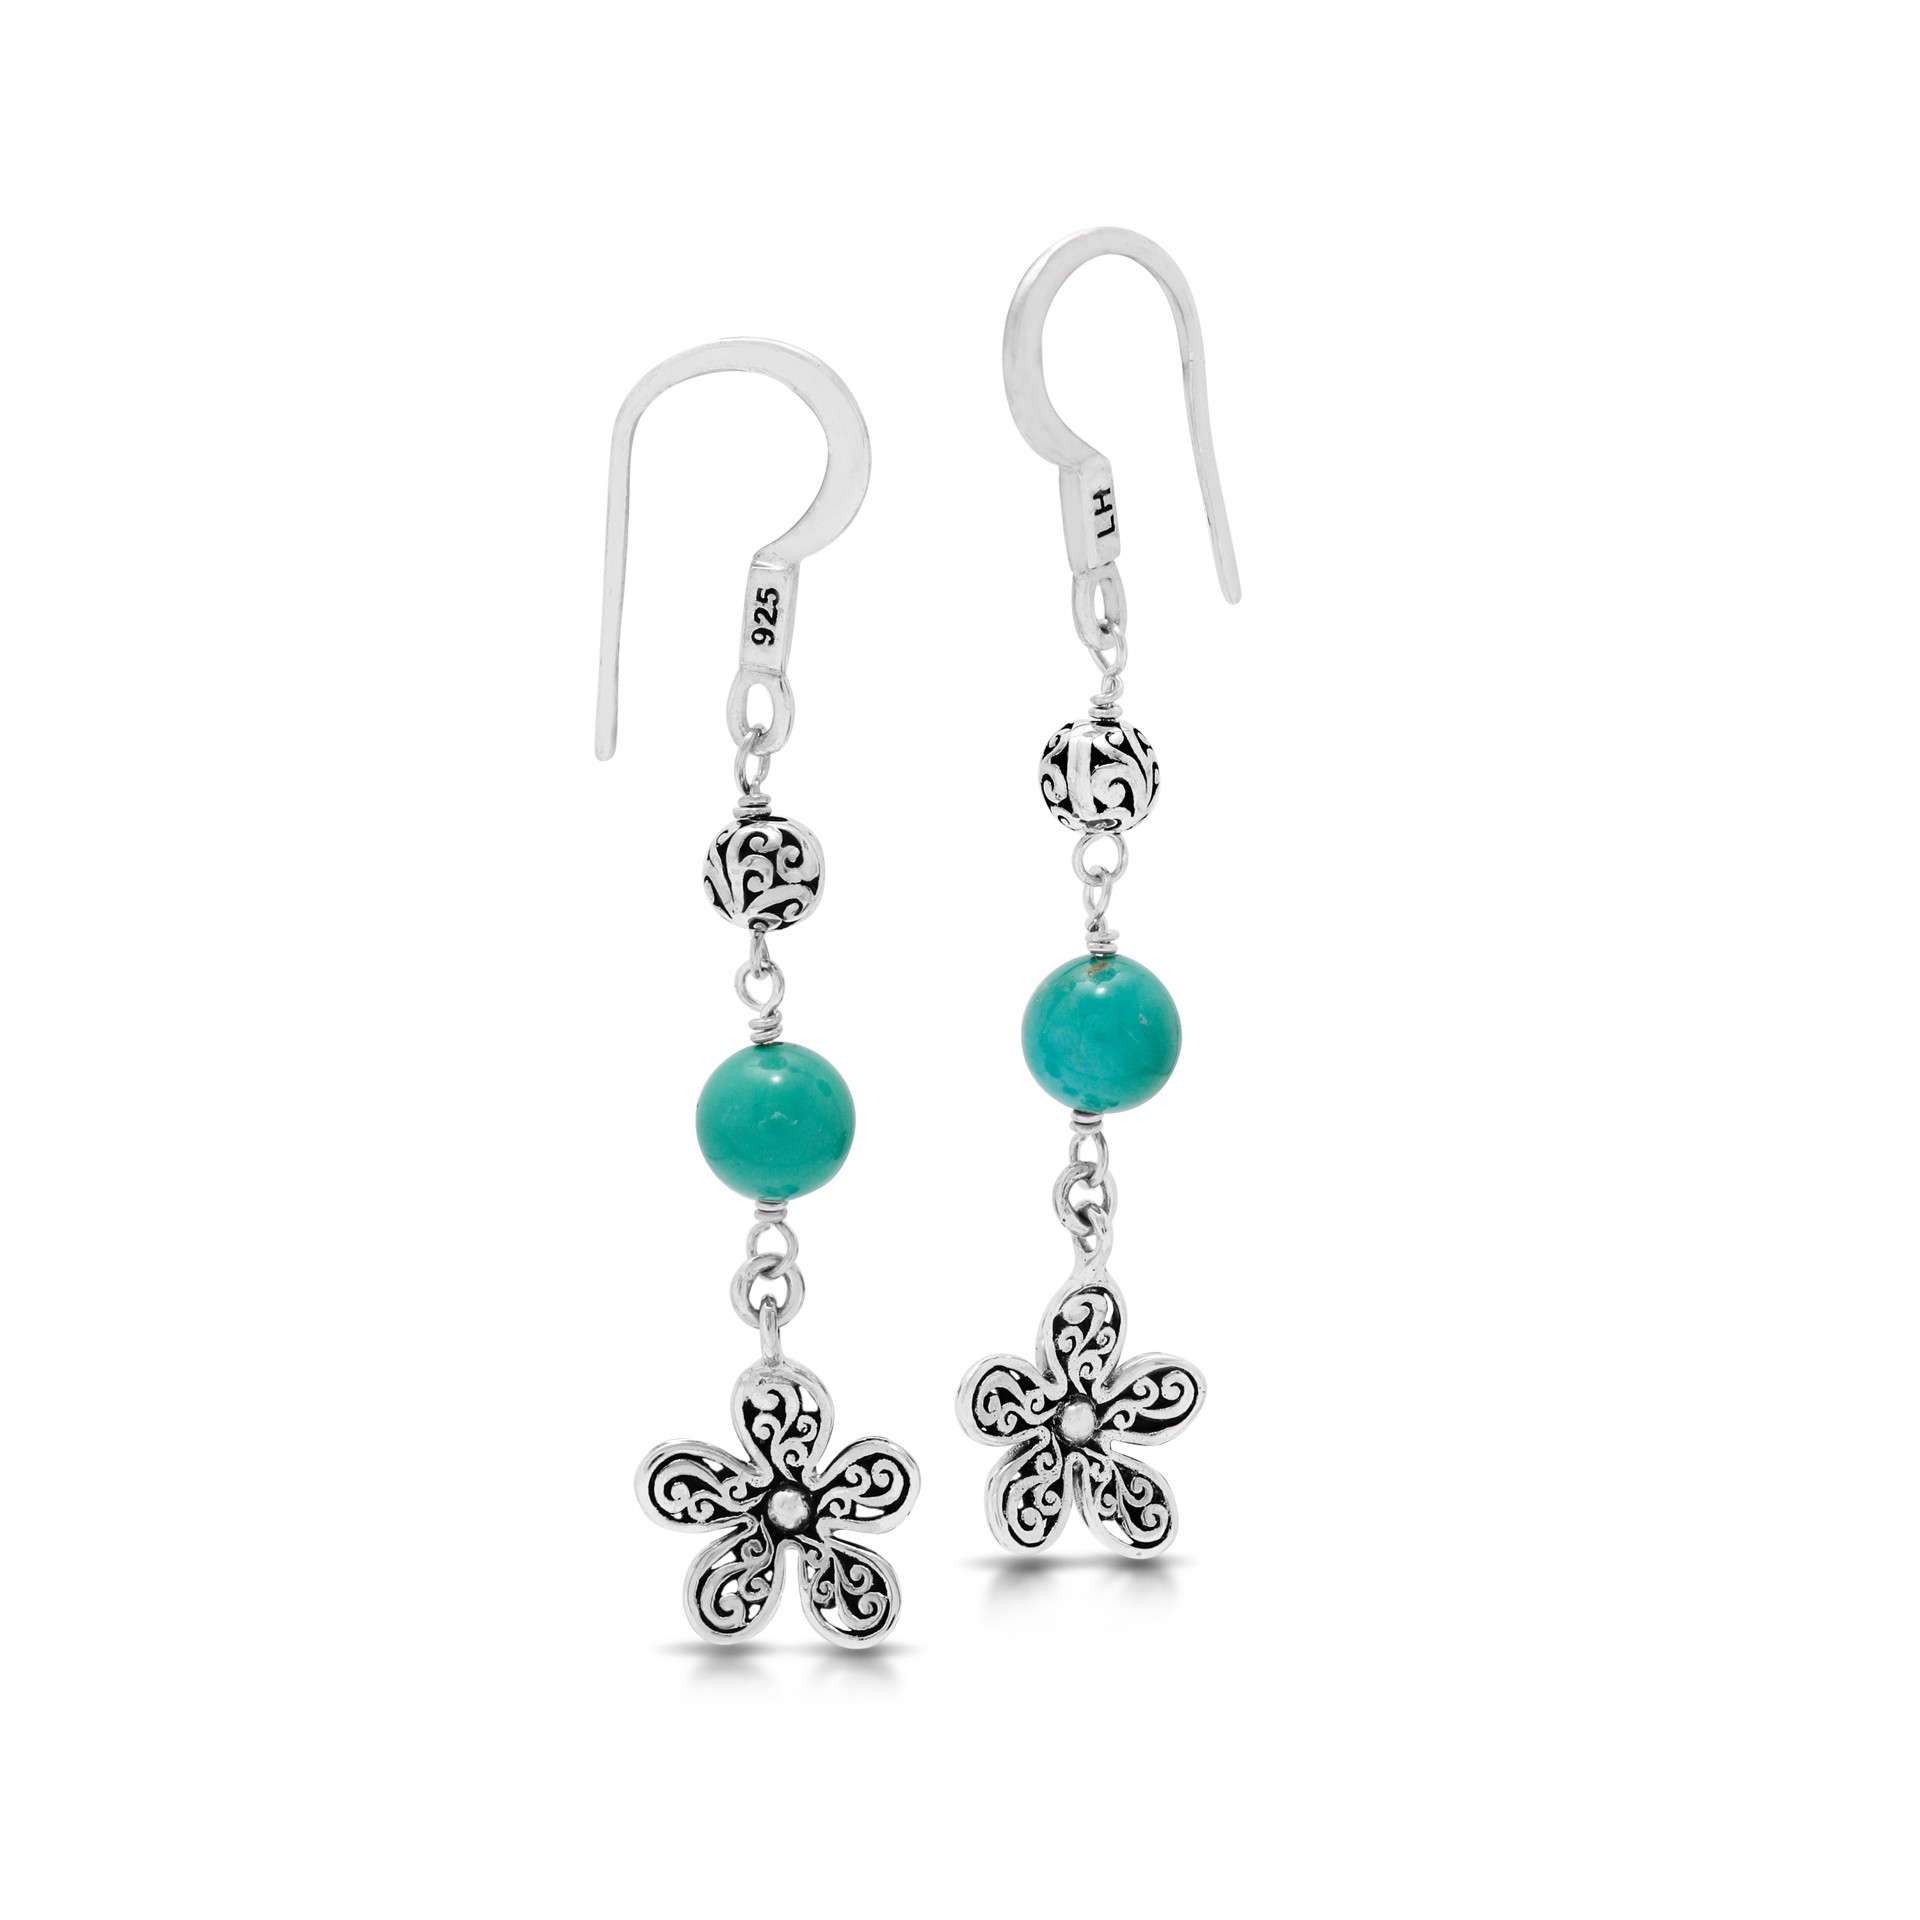 Scroll Flower Charms Blue Turquoise Drop Earrings by Lois Hill